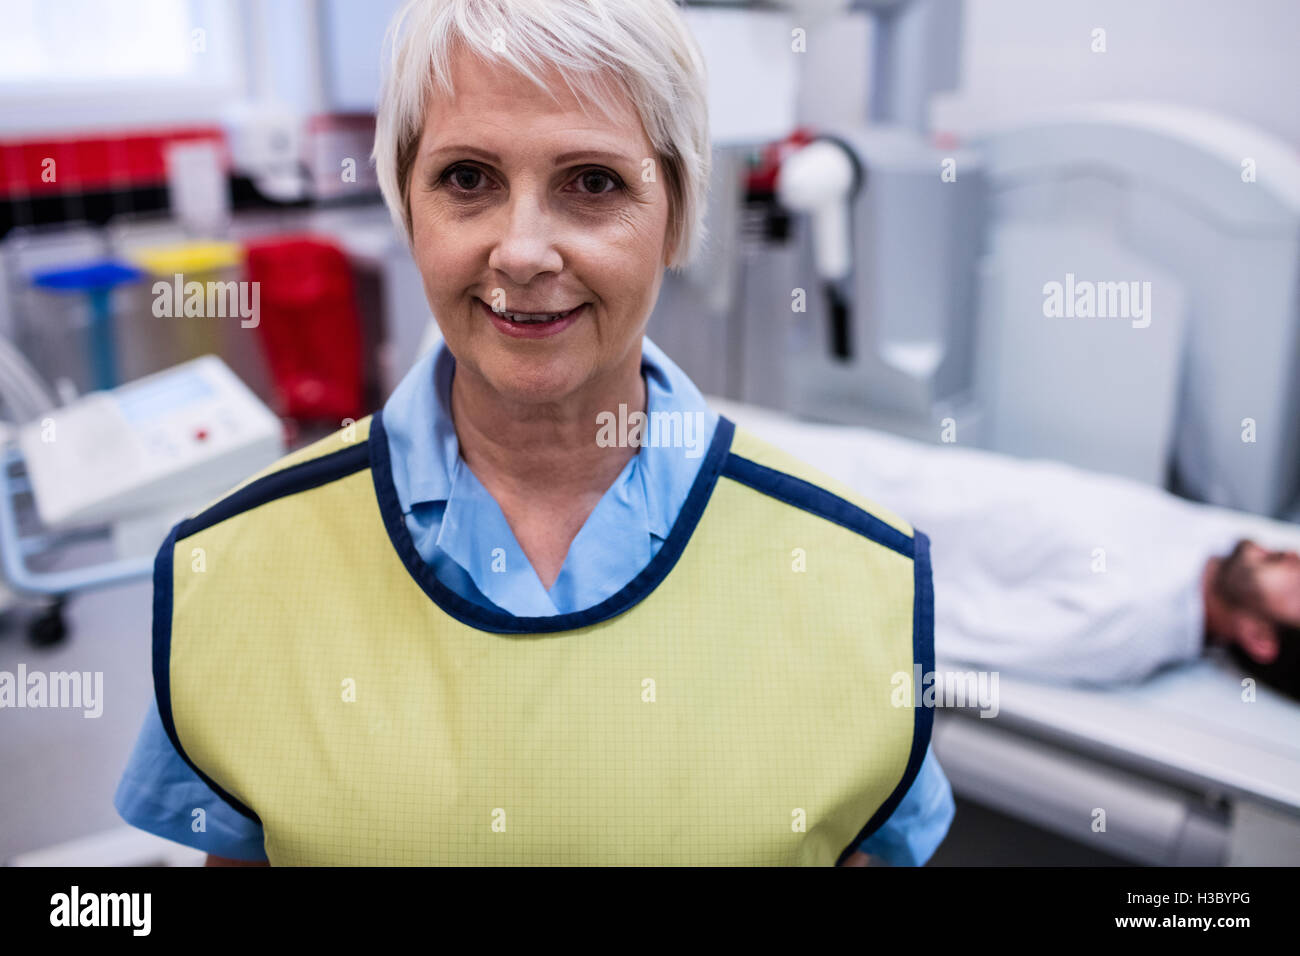 Portrait of smiling doctor standing in x-ray room Stock Photo